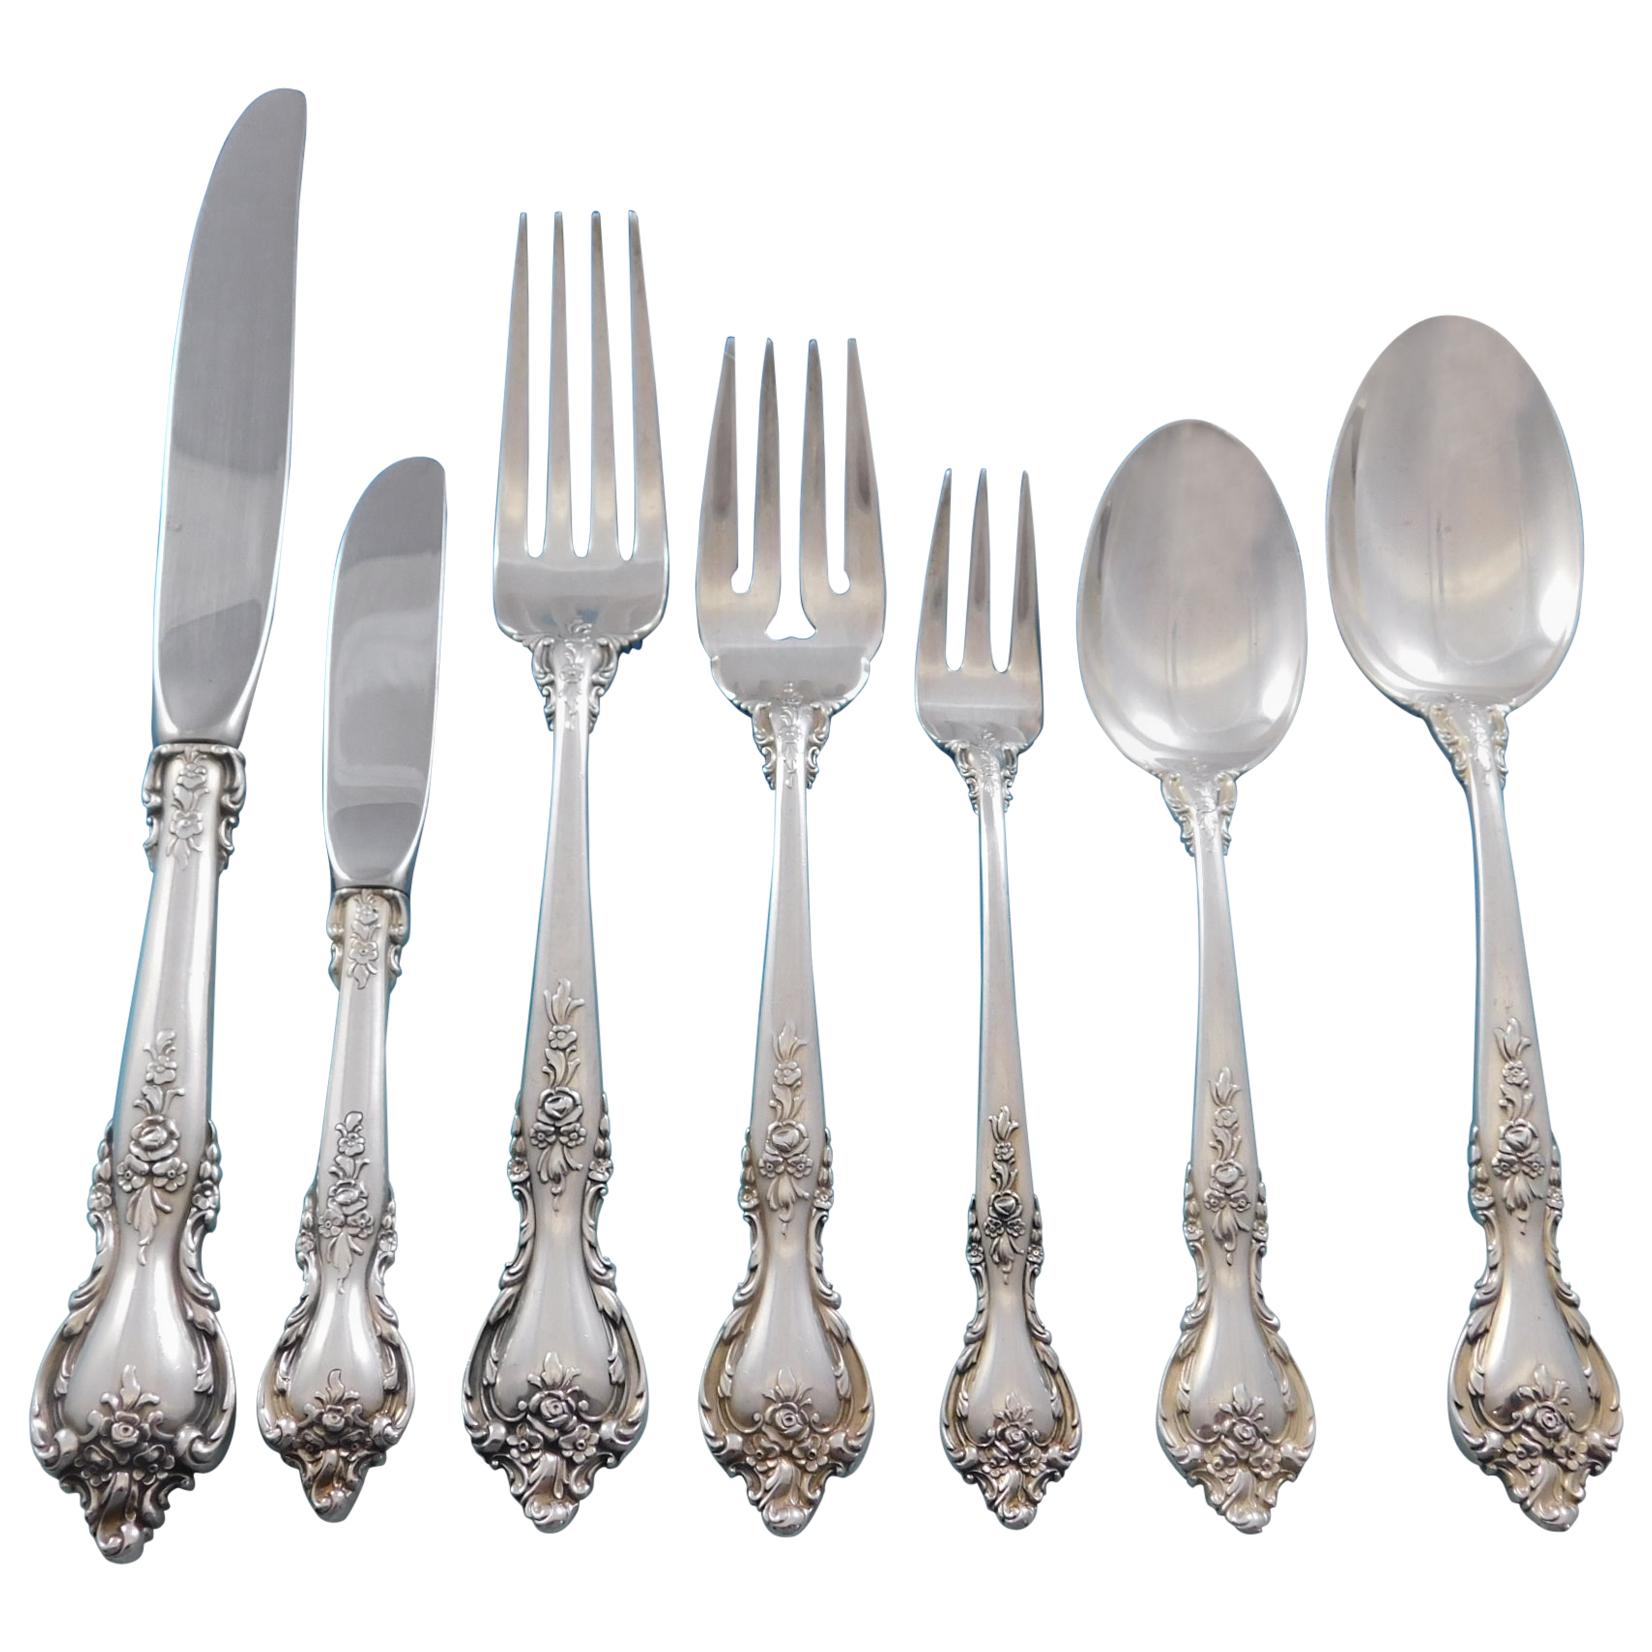 Delacourt by Lunt Sterling Silver Flatware Set for 8 Service 70 Pieces